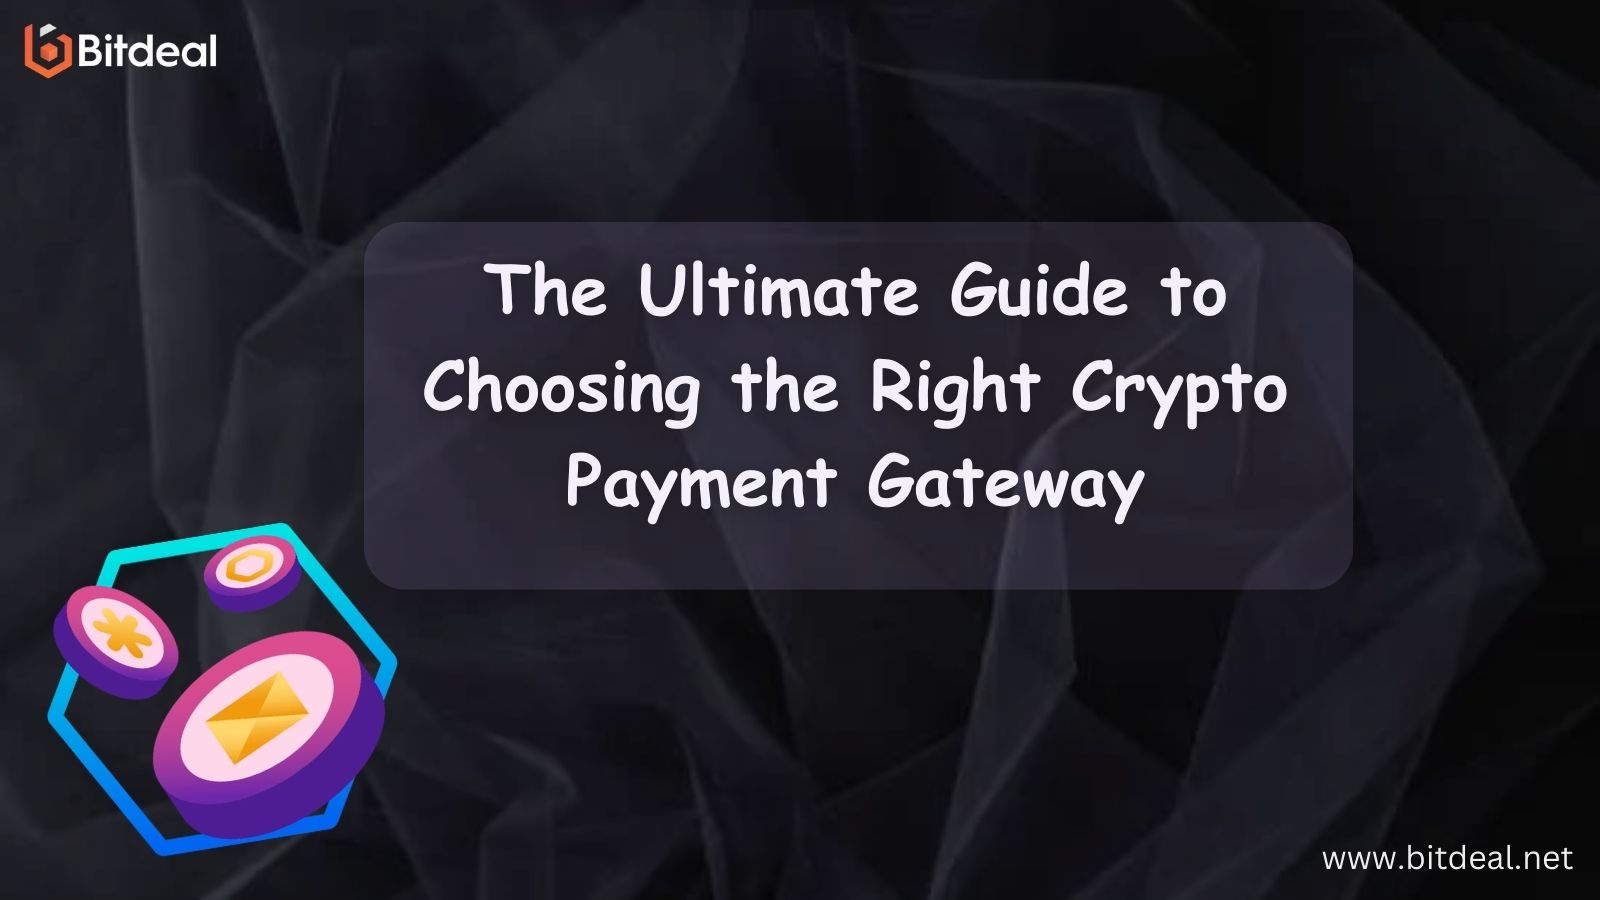 The Ultimate Guide to Choosing the Right Crypto Payment Gateway